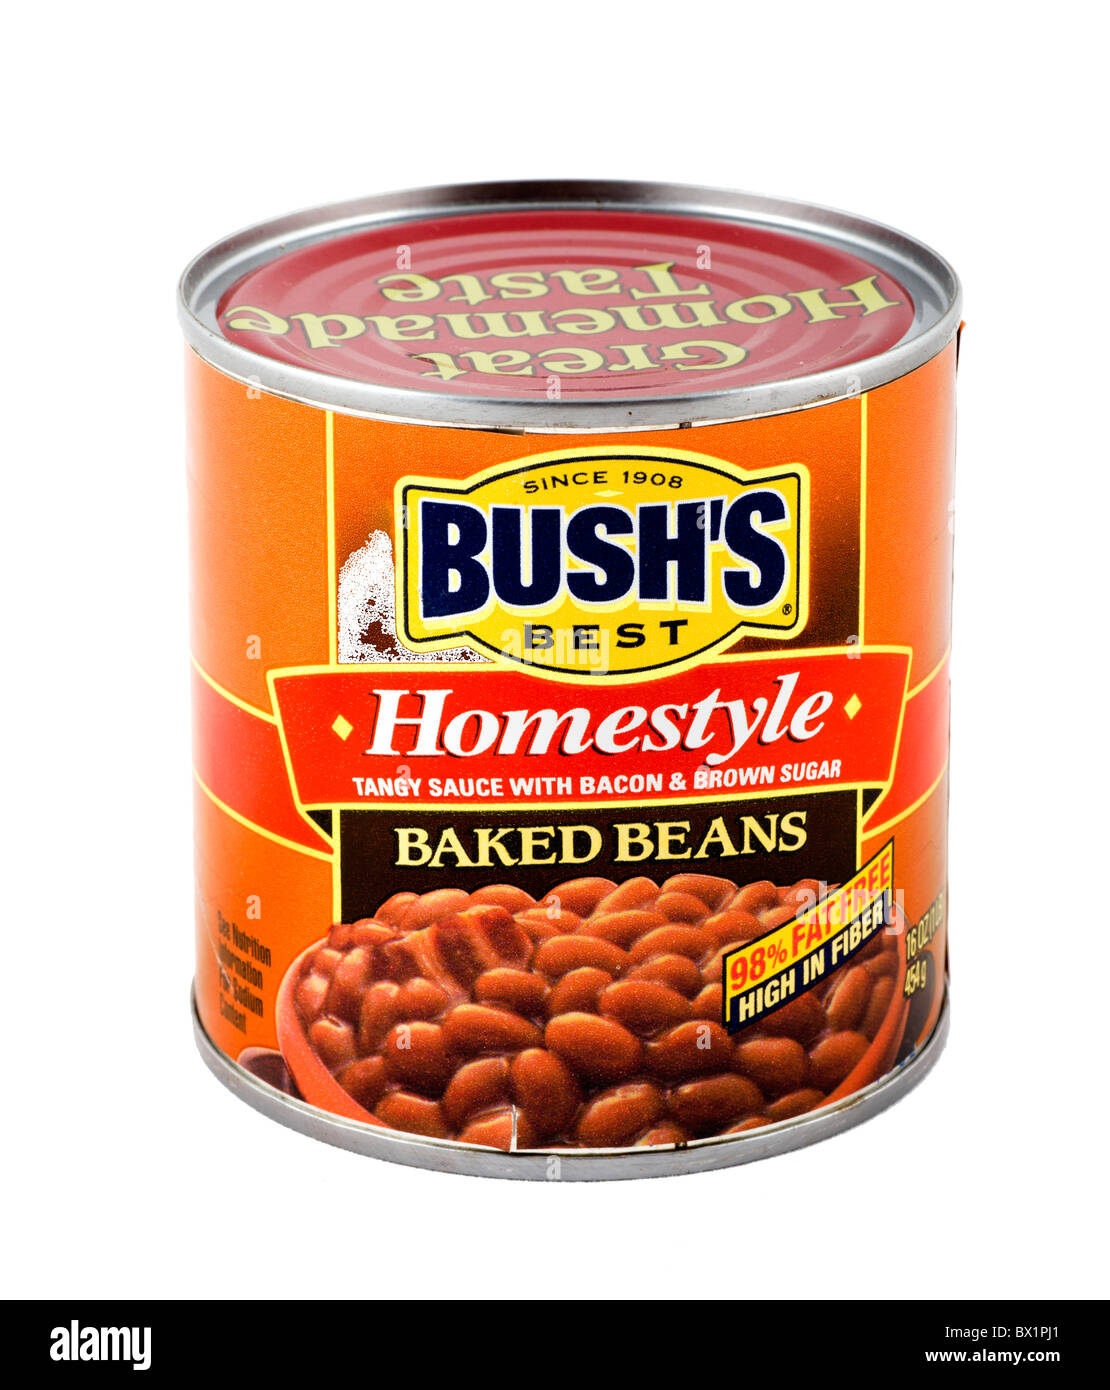 Can of Bush's Homestyle Baked Beans, USA Stock Photo